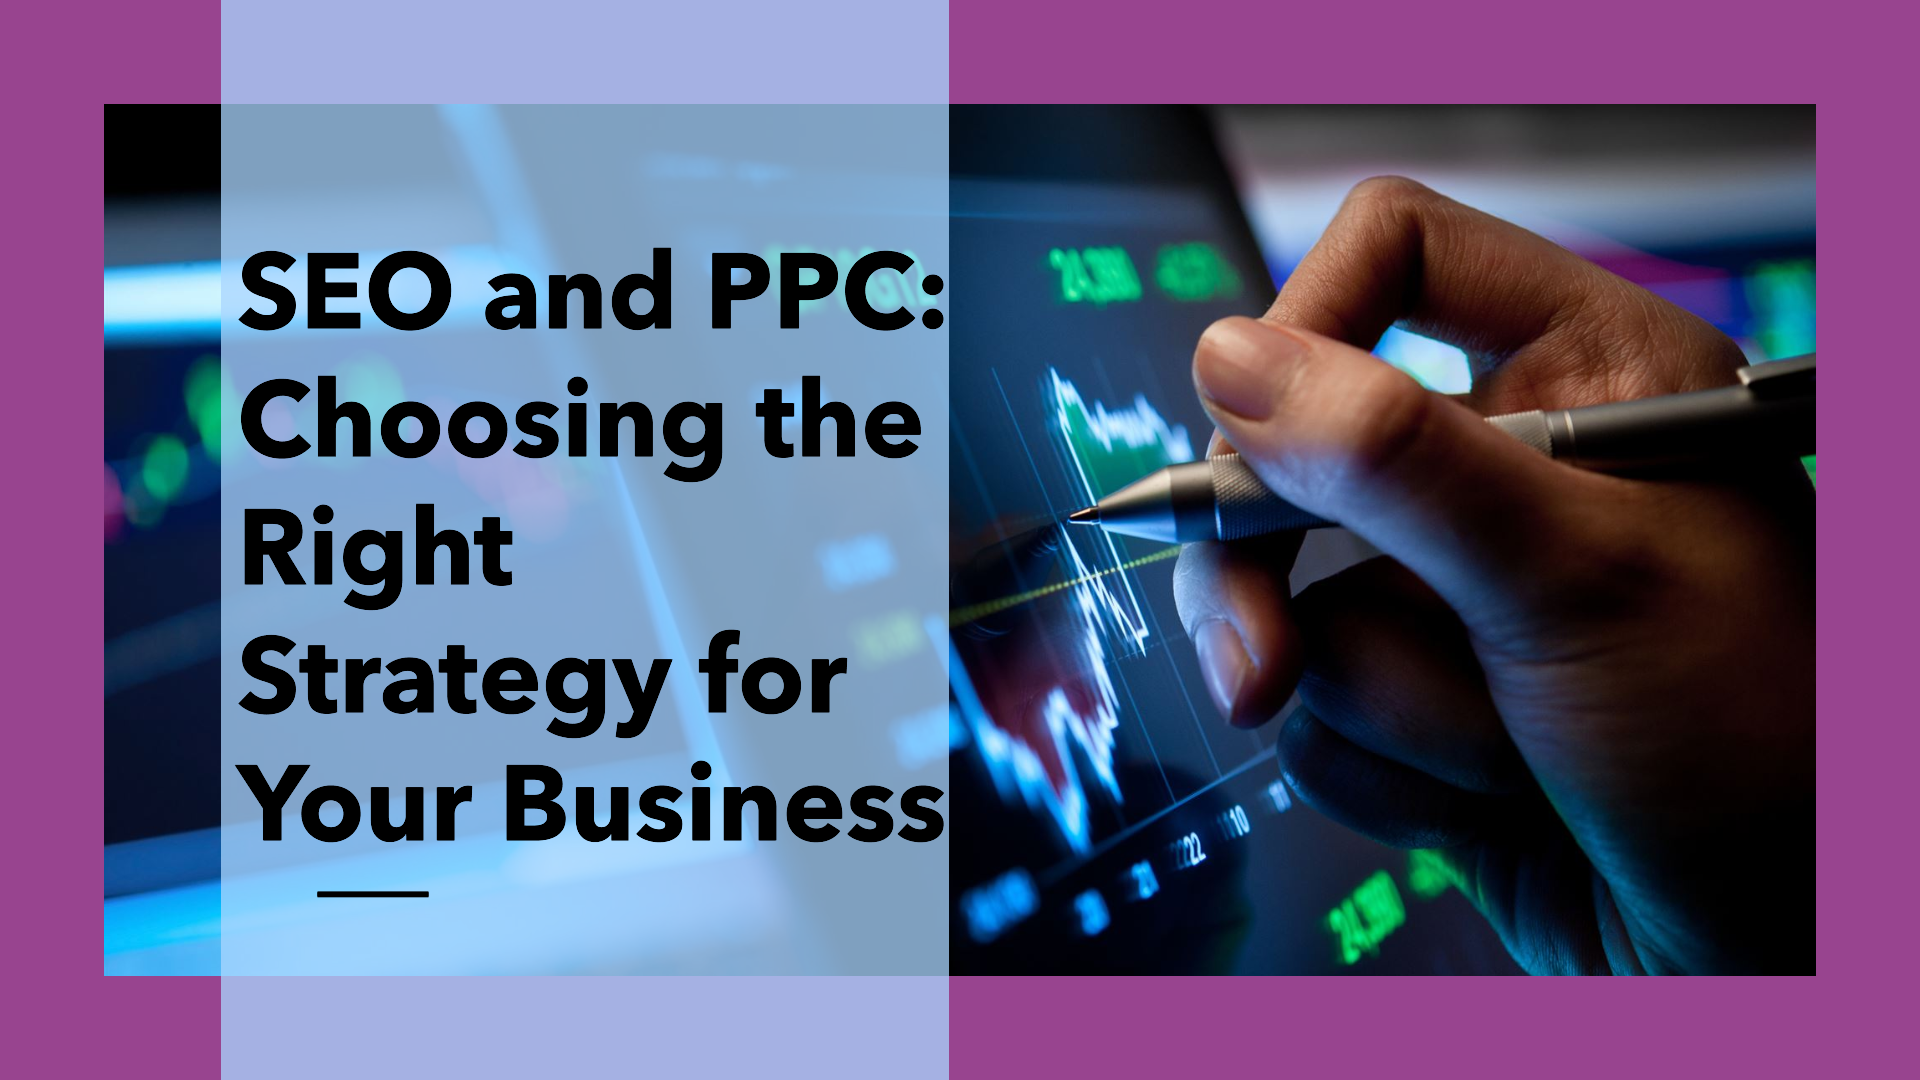 SEO and PPC: Choosing the Right Strategy for Your Business